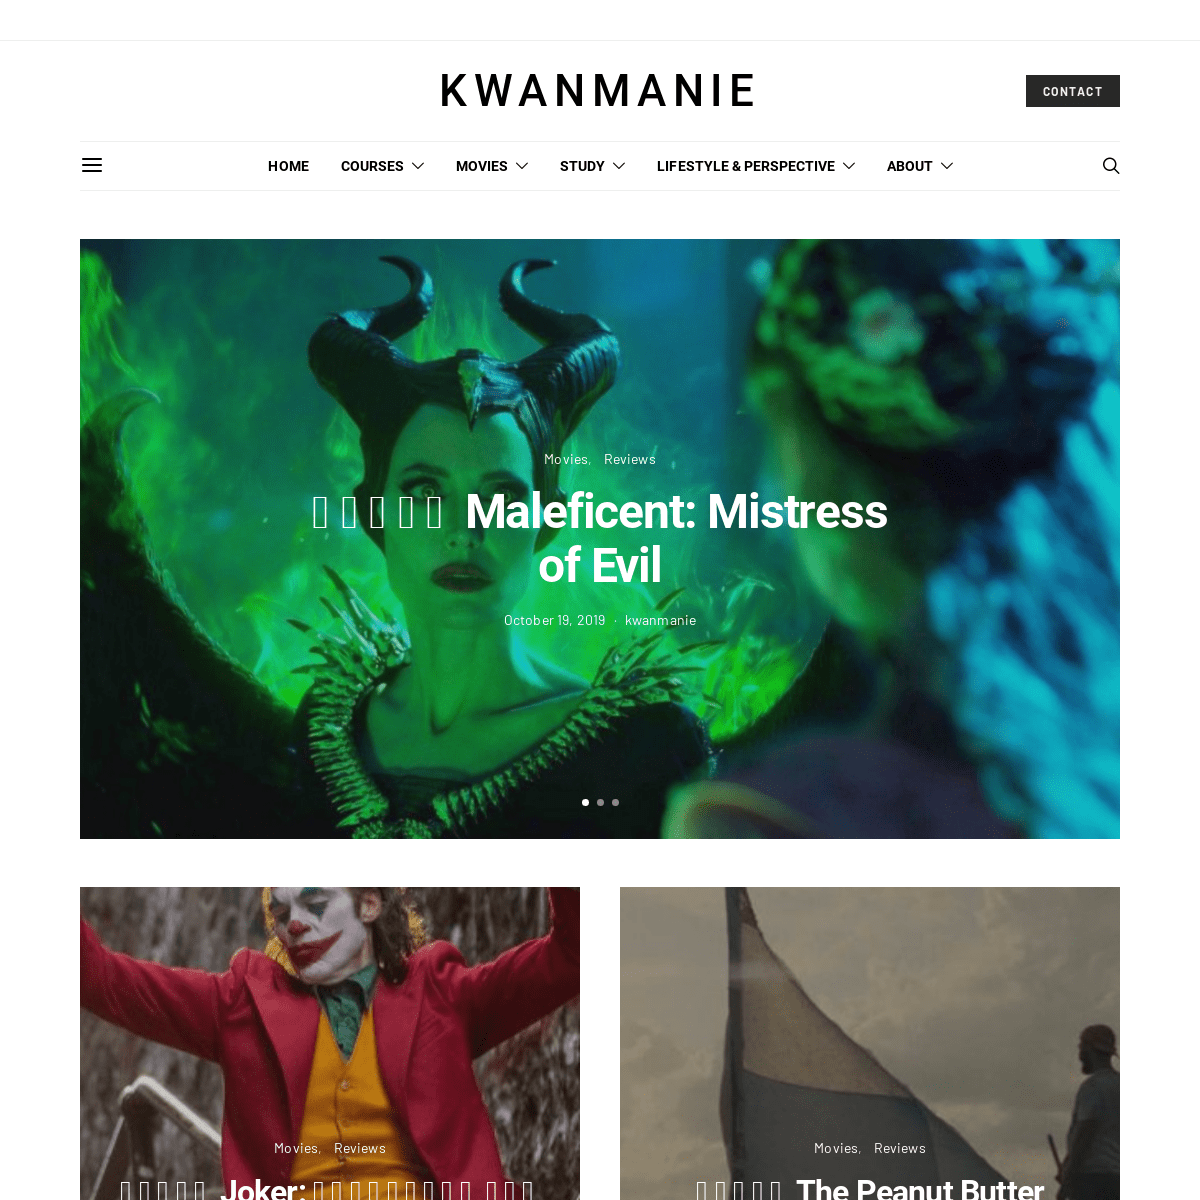 A complete backup of kwanmanie.com